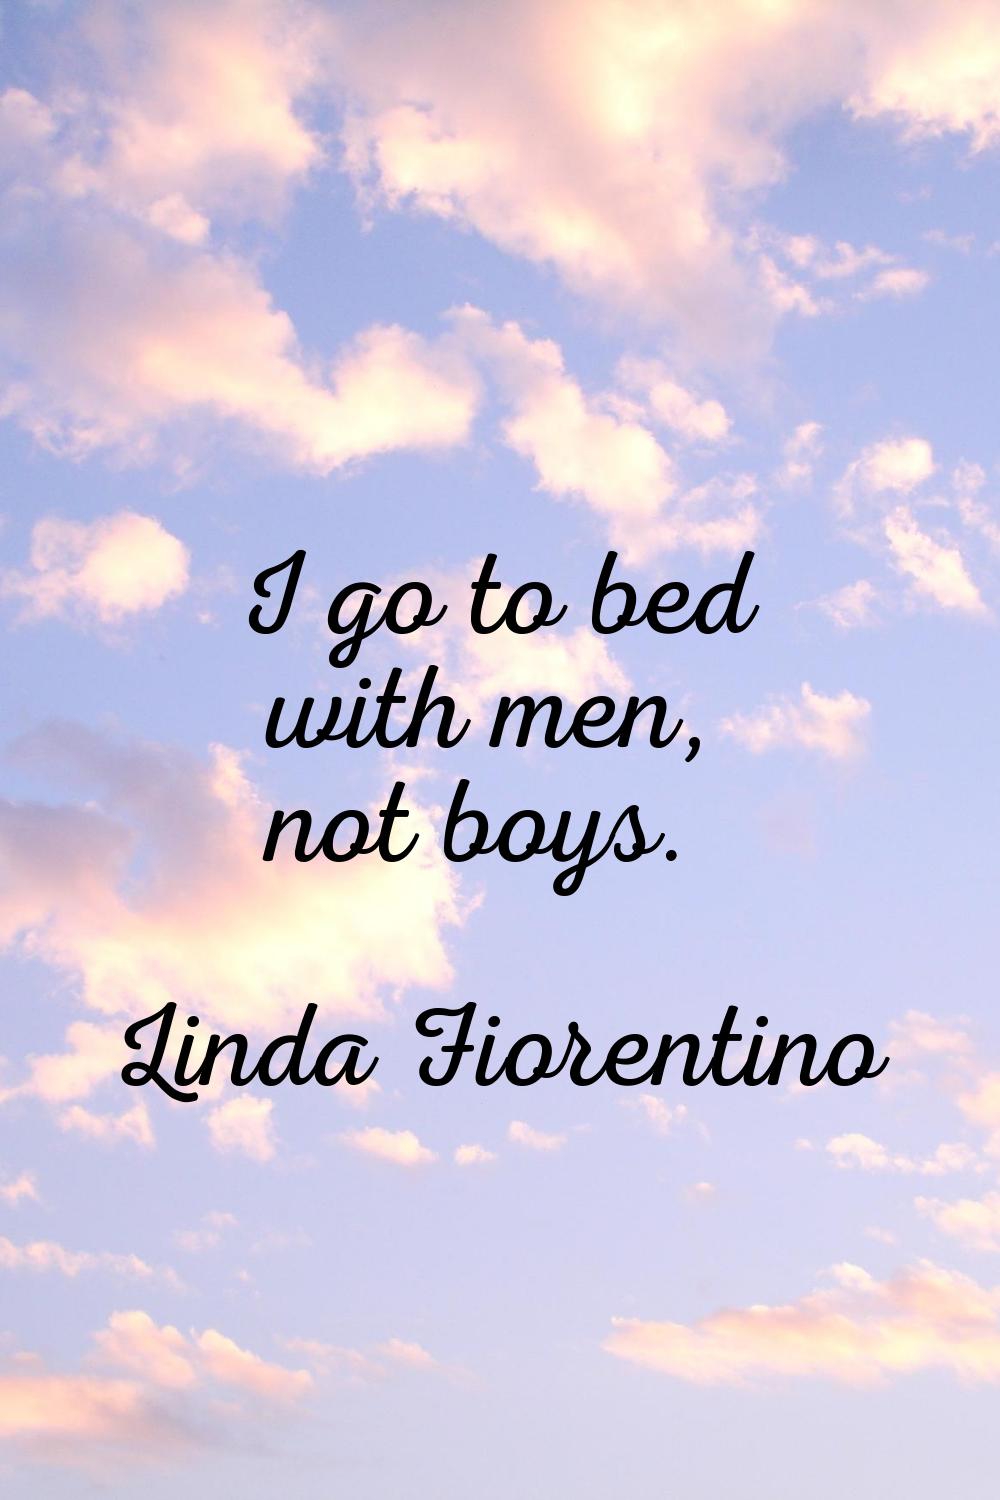 I go to bed with men, not boys.